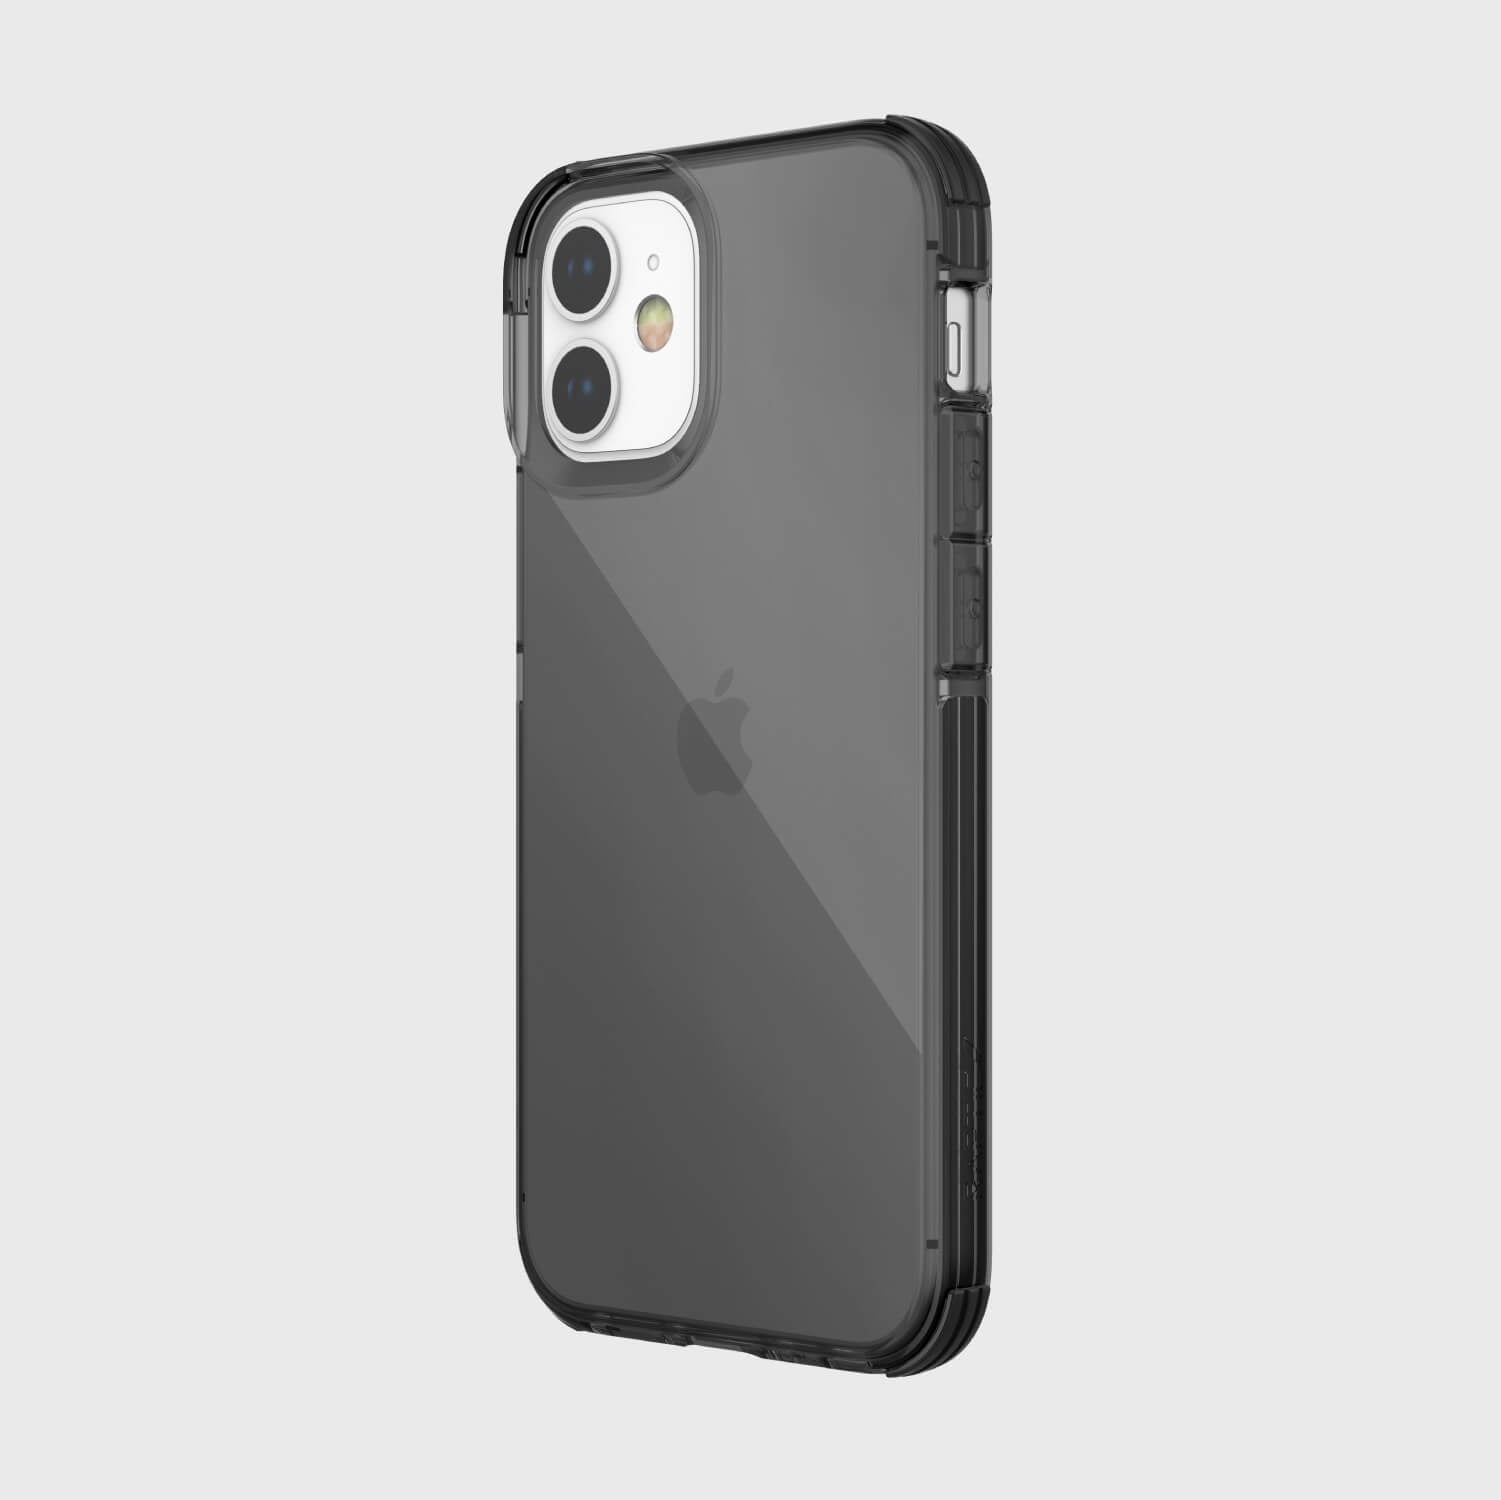 The Raptic iPhone 12 & iPhone 12 Pro Case - CLEAR offers 2-metre drop protection and is compatible with iPhone 12 & iPhone 12 Pro.